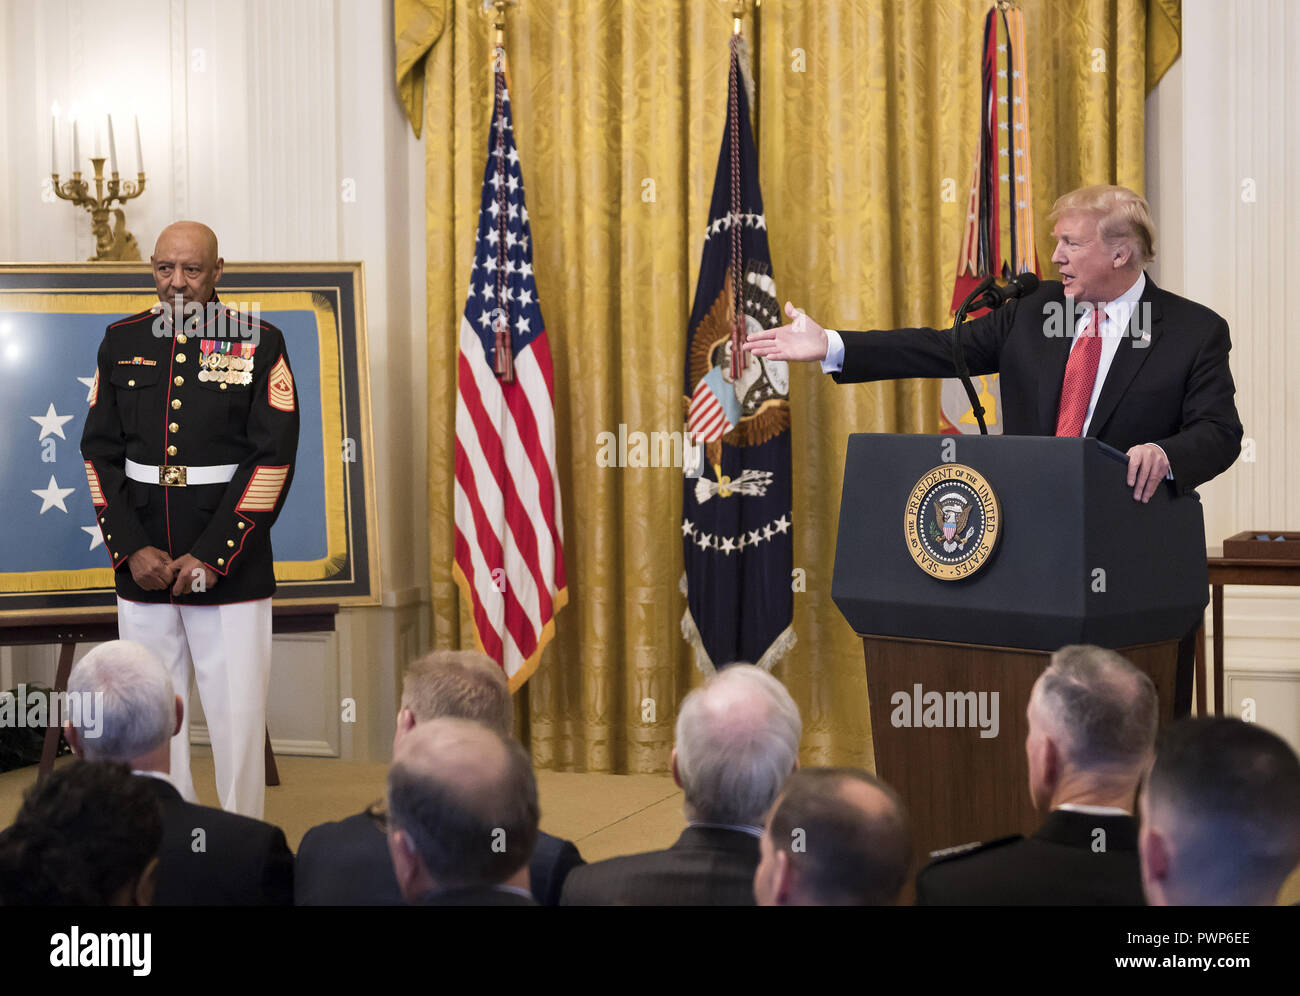 Washington, District of Columbia, USA. 17th Oct, 2018. United States President Donald J. Trump awards the Medal of Honor to Sergeant Major John L. Canley, US Marine Corps (Retired), for conspicuous gallantry during the Vietnam War in a ceremony in the East Room of the the White House in Washington, DC on Wednesday, October 17, 2018 Credit: Ron Sachs/CNP/ZUMA Wire/Alamy Live News Stock Photo